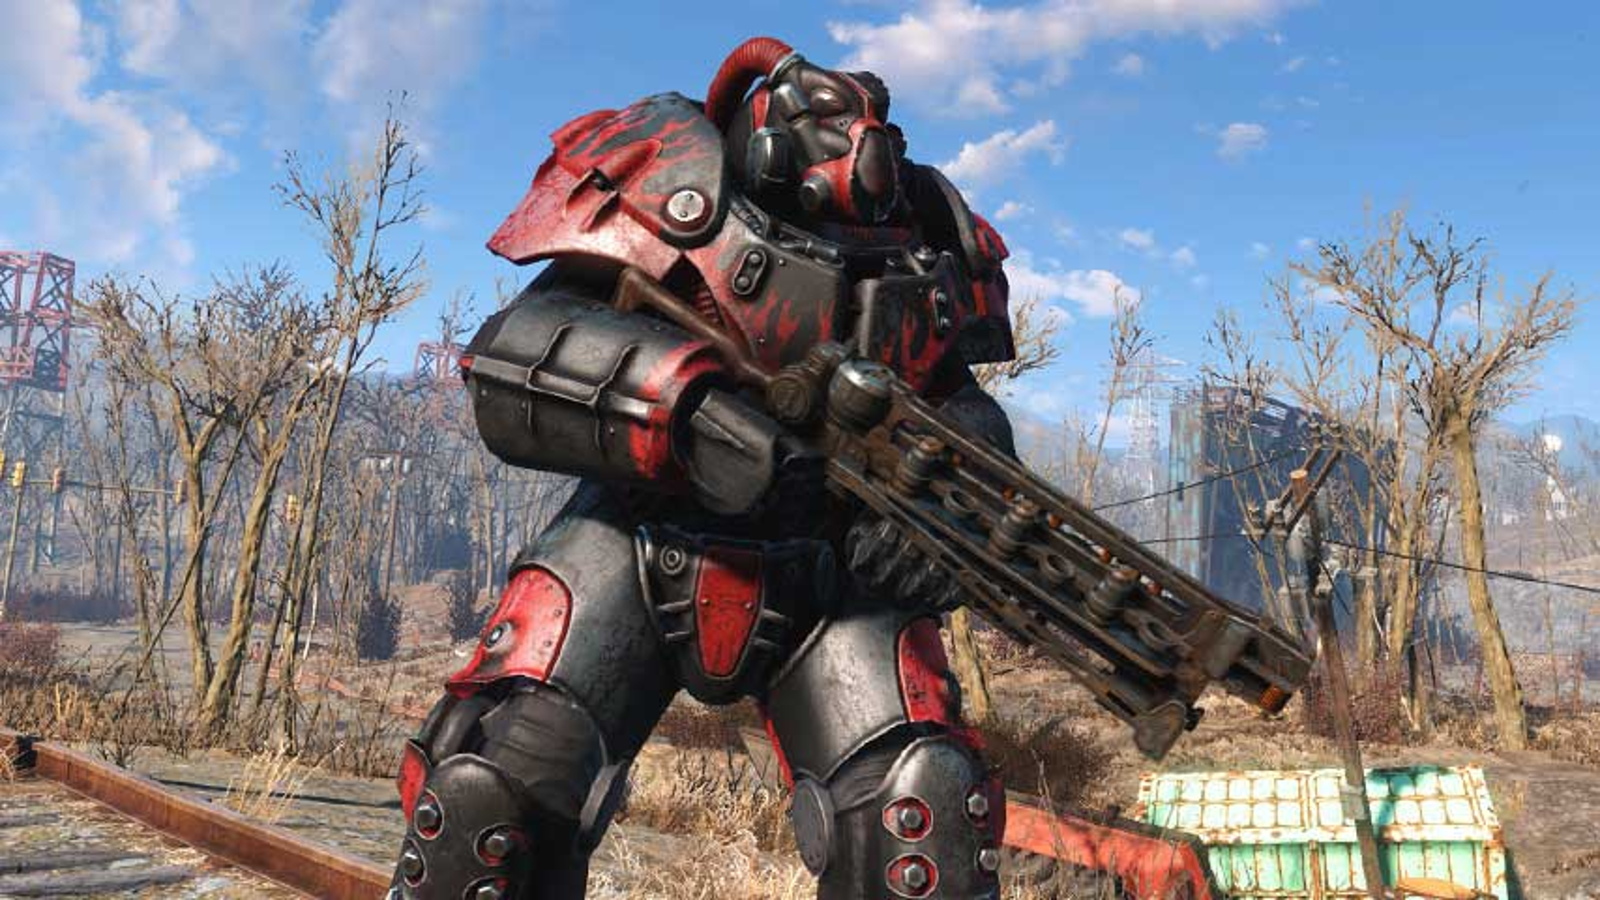 How to get Fallout 4 mods on PS4 and Xbox One